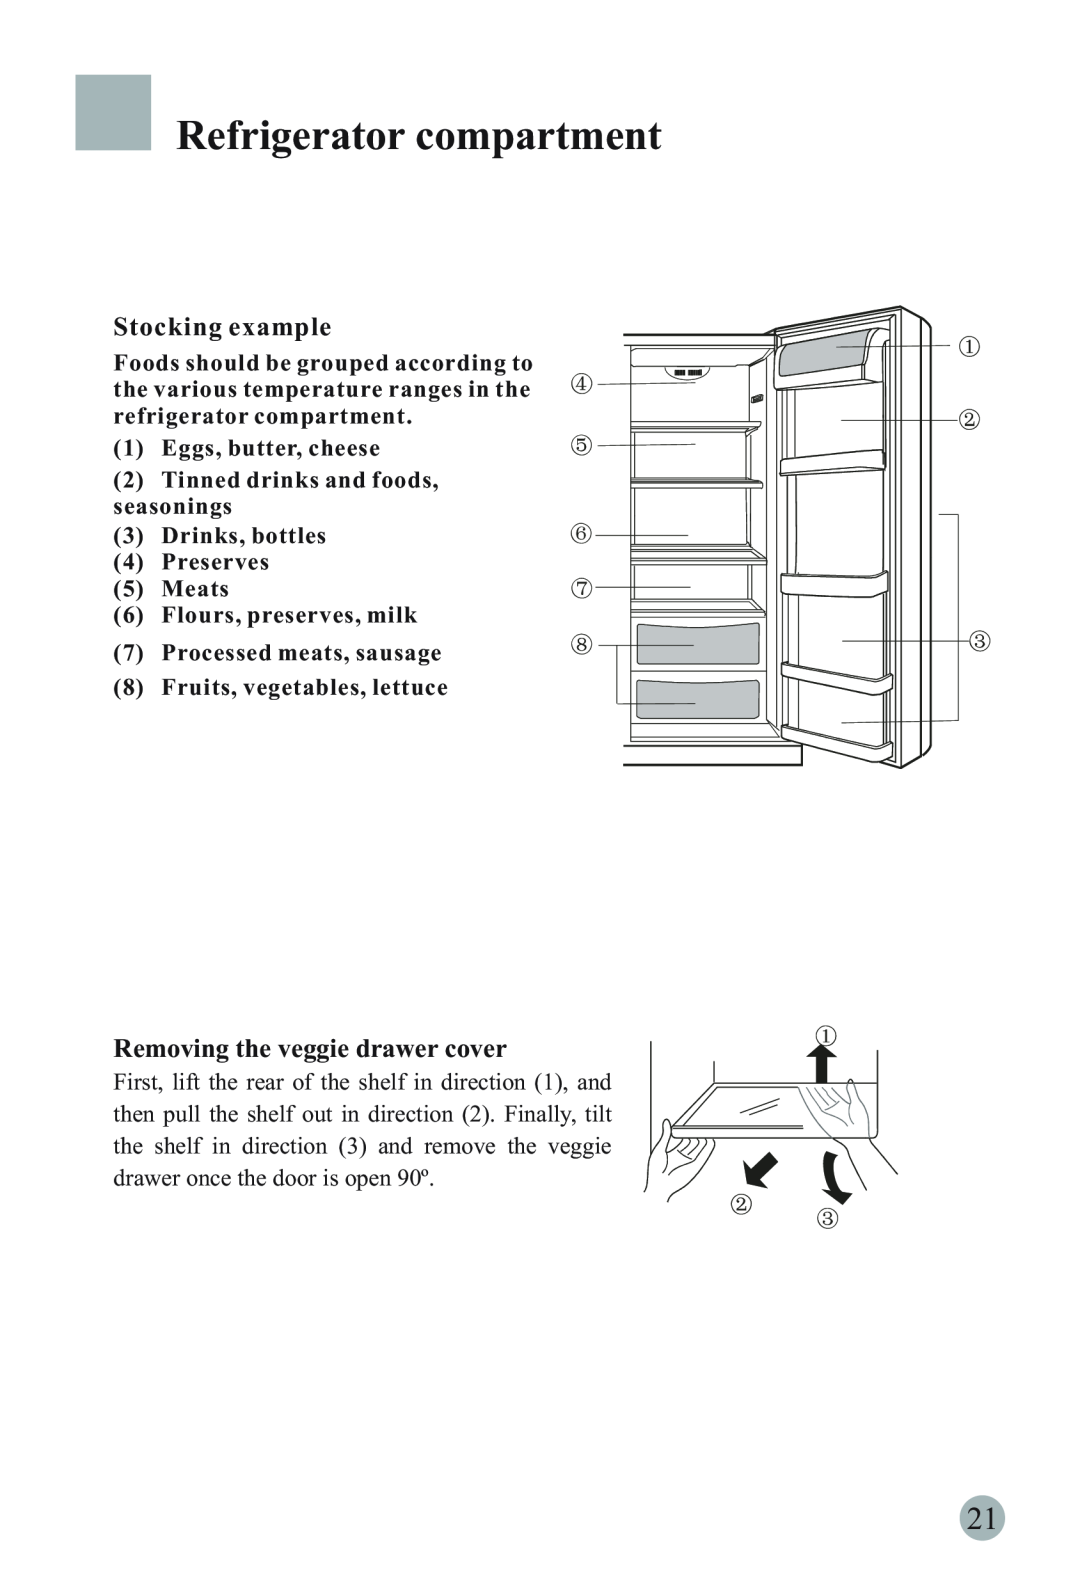 Haier HRF-663IRG manual Stocking example, Removing the veggie drawer cover, Refrigerator compartment 